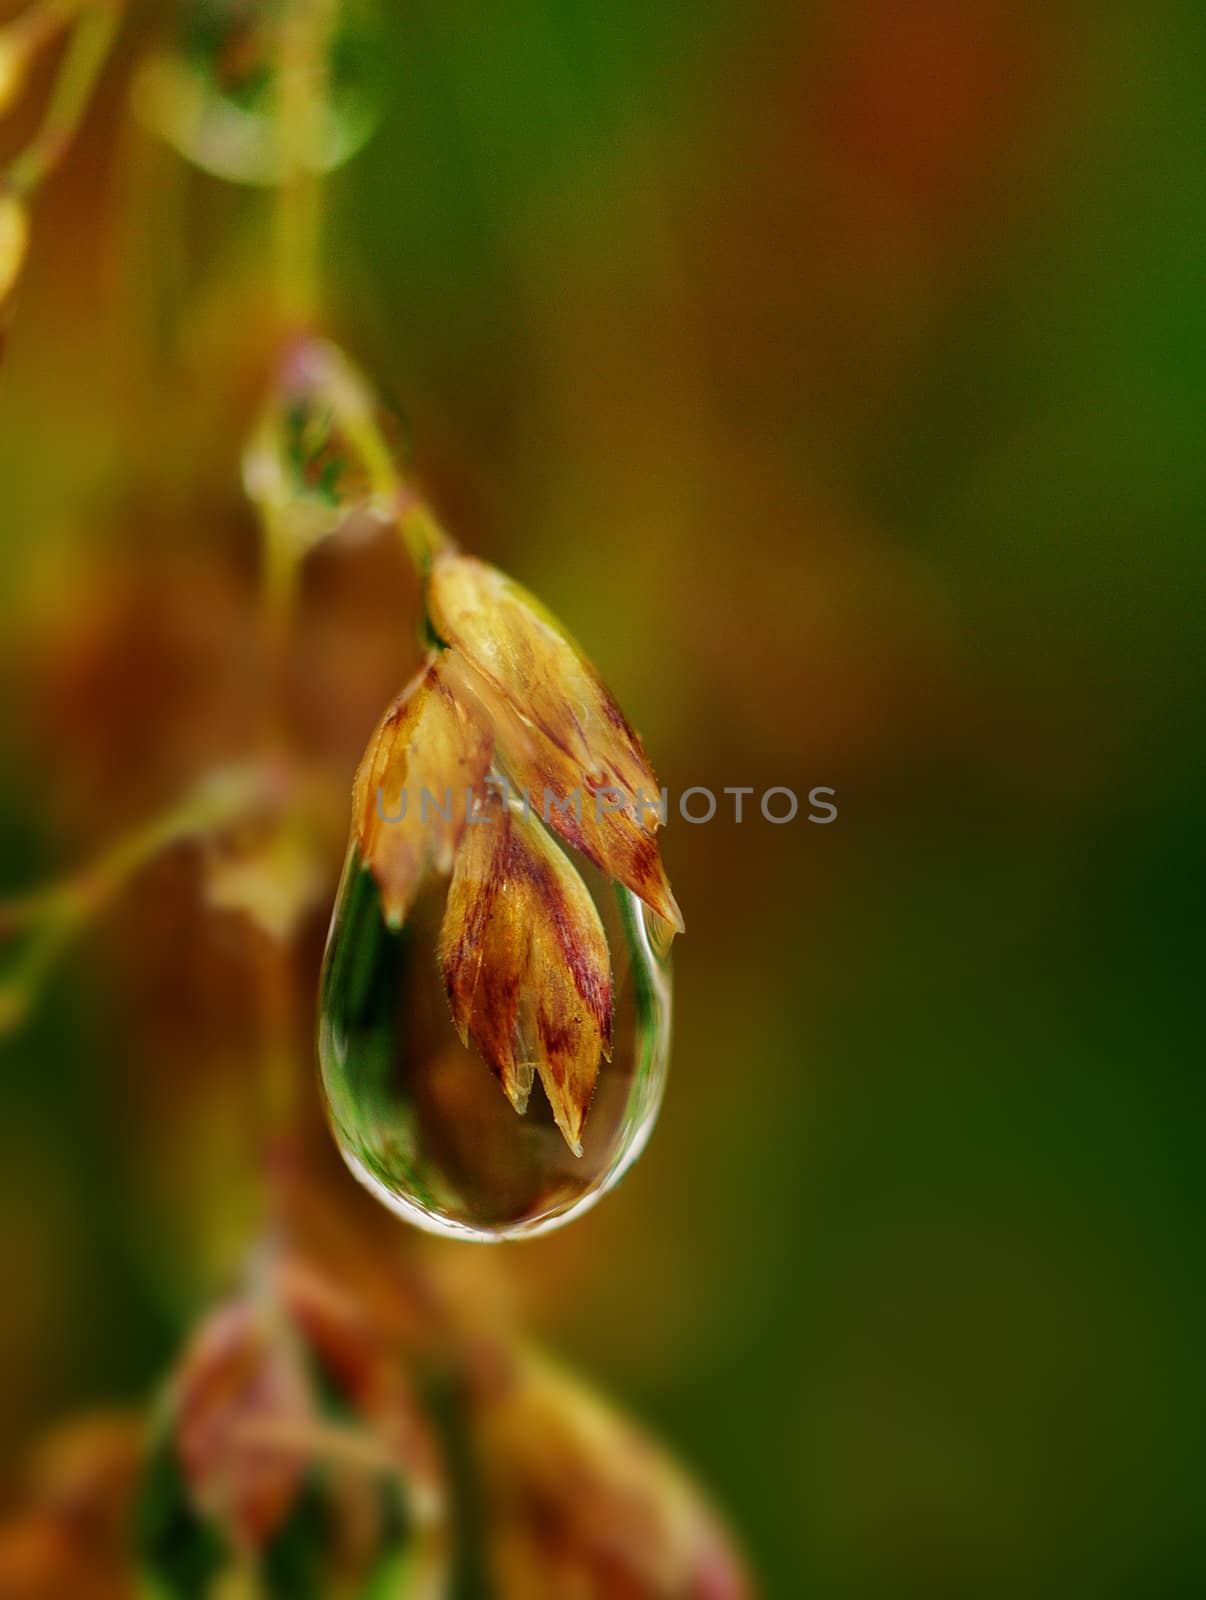 Single dew drop quivers with colors captured within; the world in a drop of dew; 